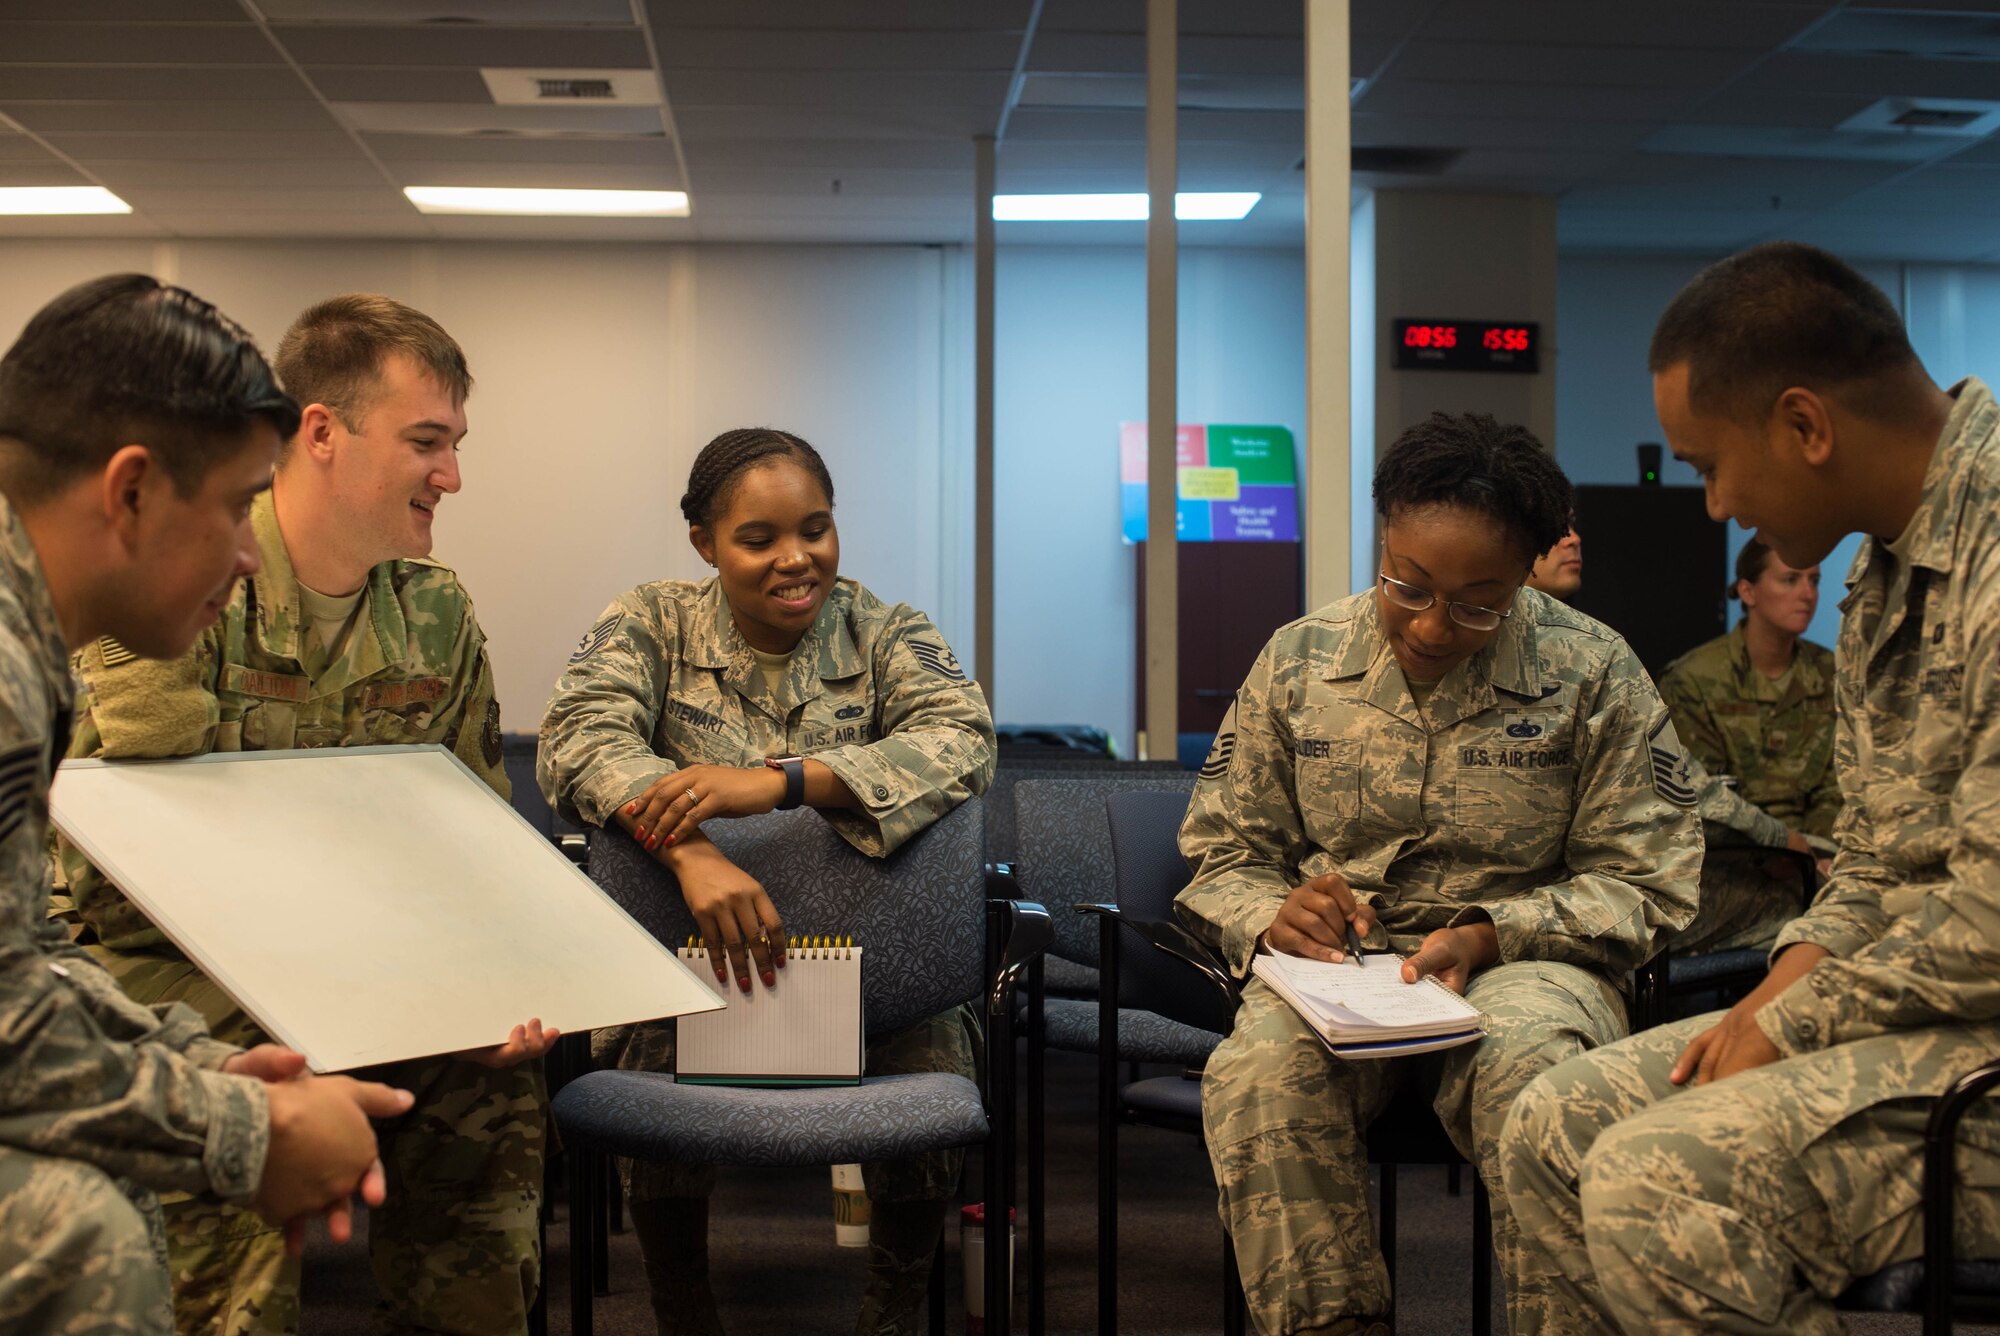 627th Logistics Readiness Squadron Airmen participate in a group activity during the 62nd Airlift Wing Manpower’s Practical Problem Solving Model course at Joint Base Lewis-McChord, Wash., Sept. 20, 2019. The group activities helped Airmen to view processes in a different way and challenge any issues they noticed. (U.S. Air Force photo by Senior Airman Tryphena Mayhugh)